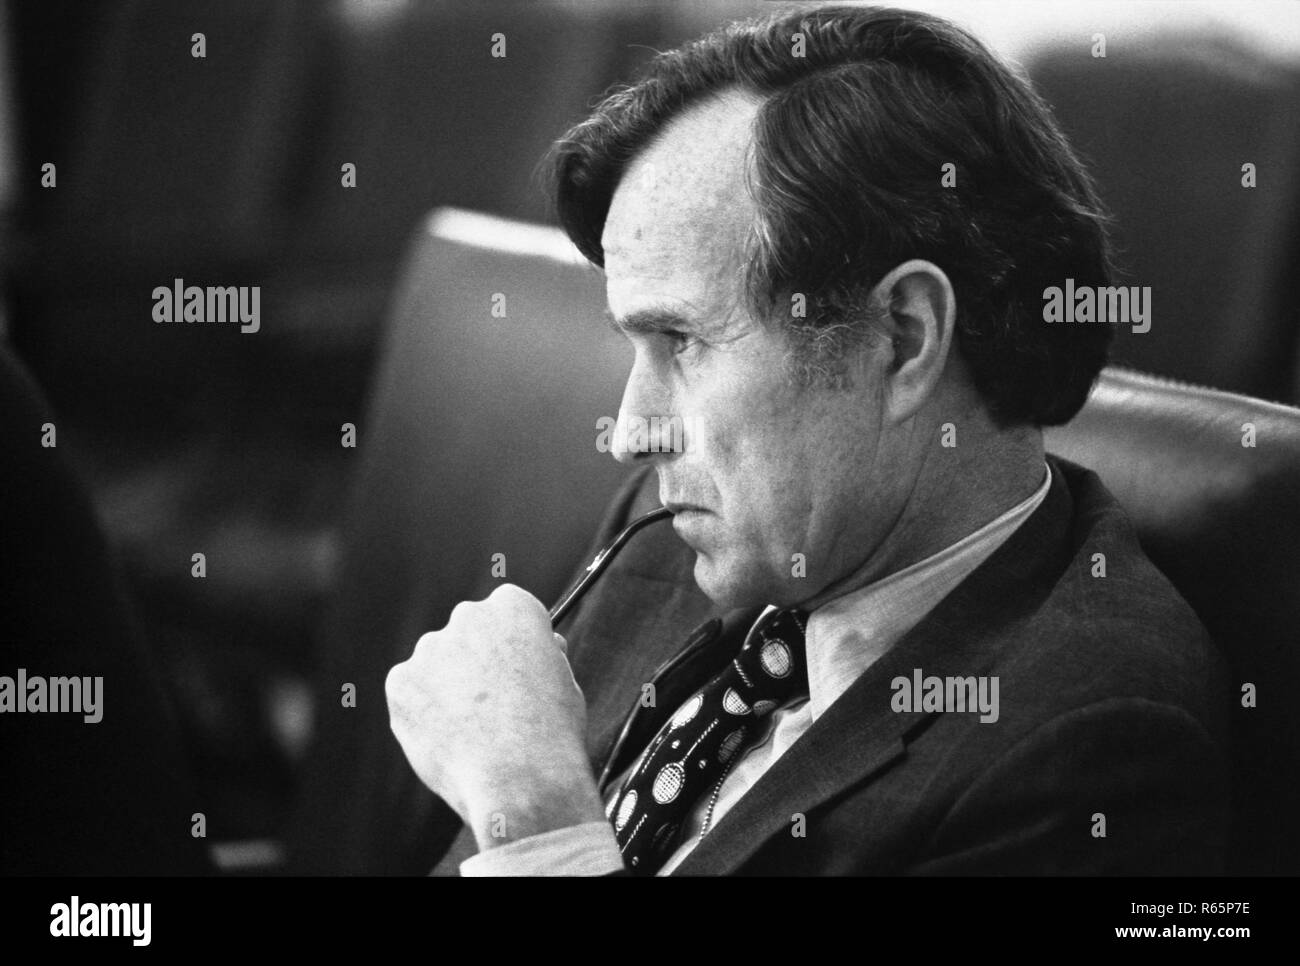 Director of the CIA, George H.W. Bush (who would later be the 41st President of the United States),  on June 17, 1976 listening intently during a meeting following the assassinations in Beirut, Lebanon of U.S. diplomats Francis E. Meloy, Jr. and Robert O. Waring. Stock Photo